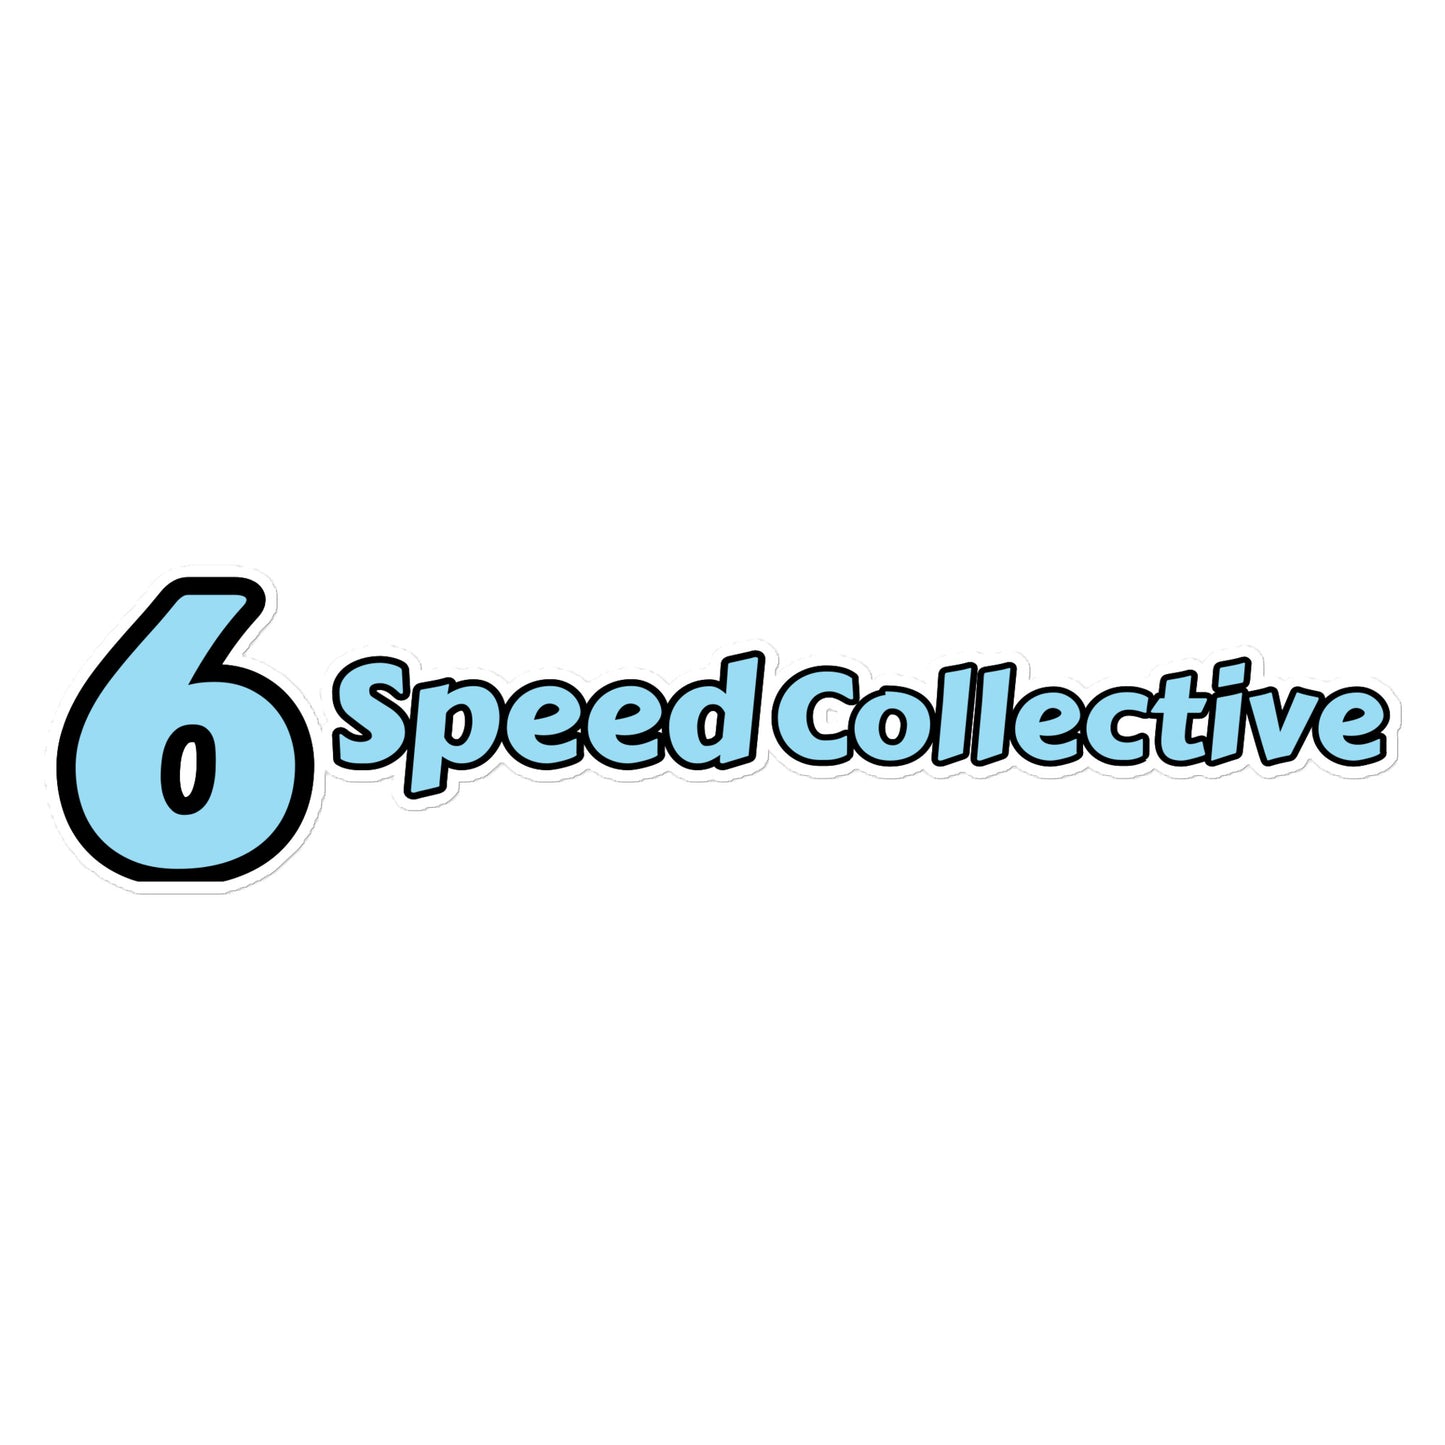 6 Speed Collective stickers